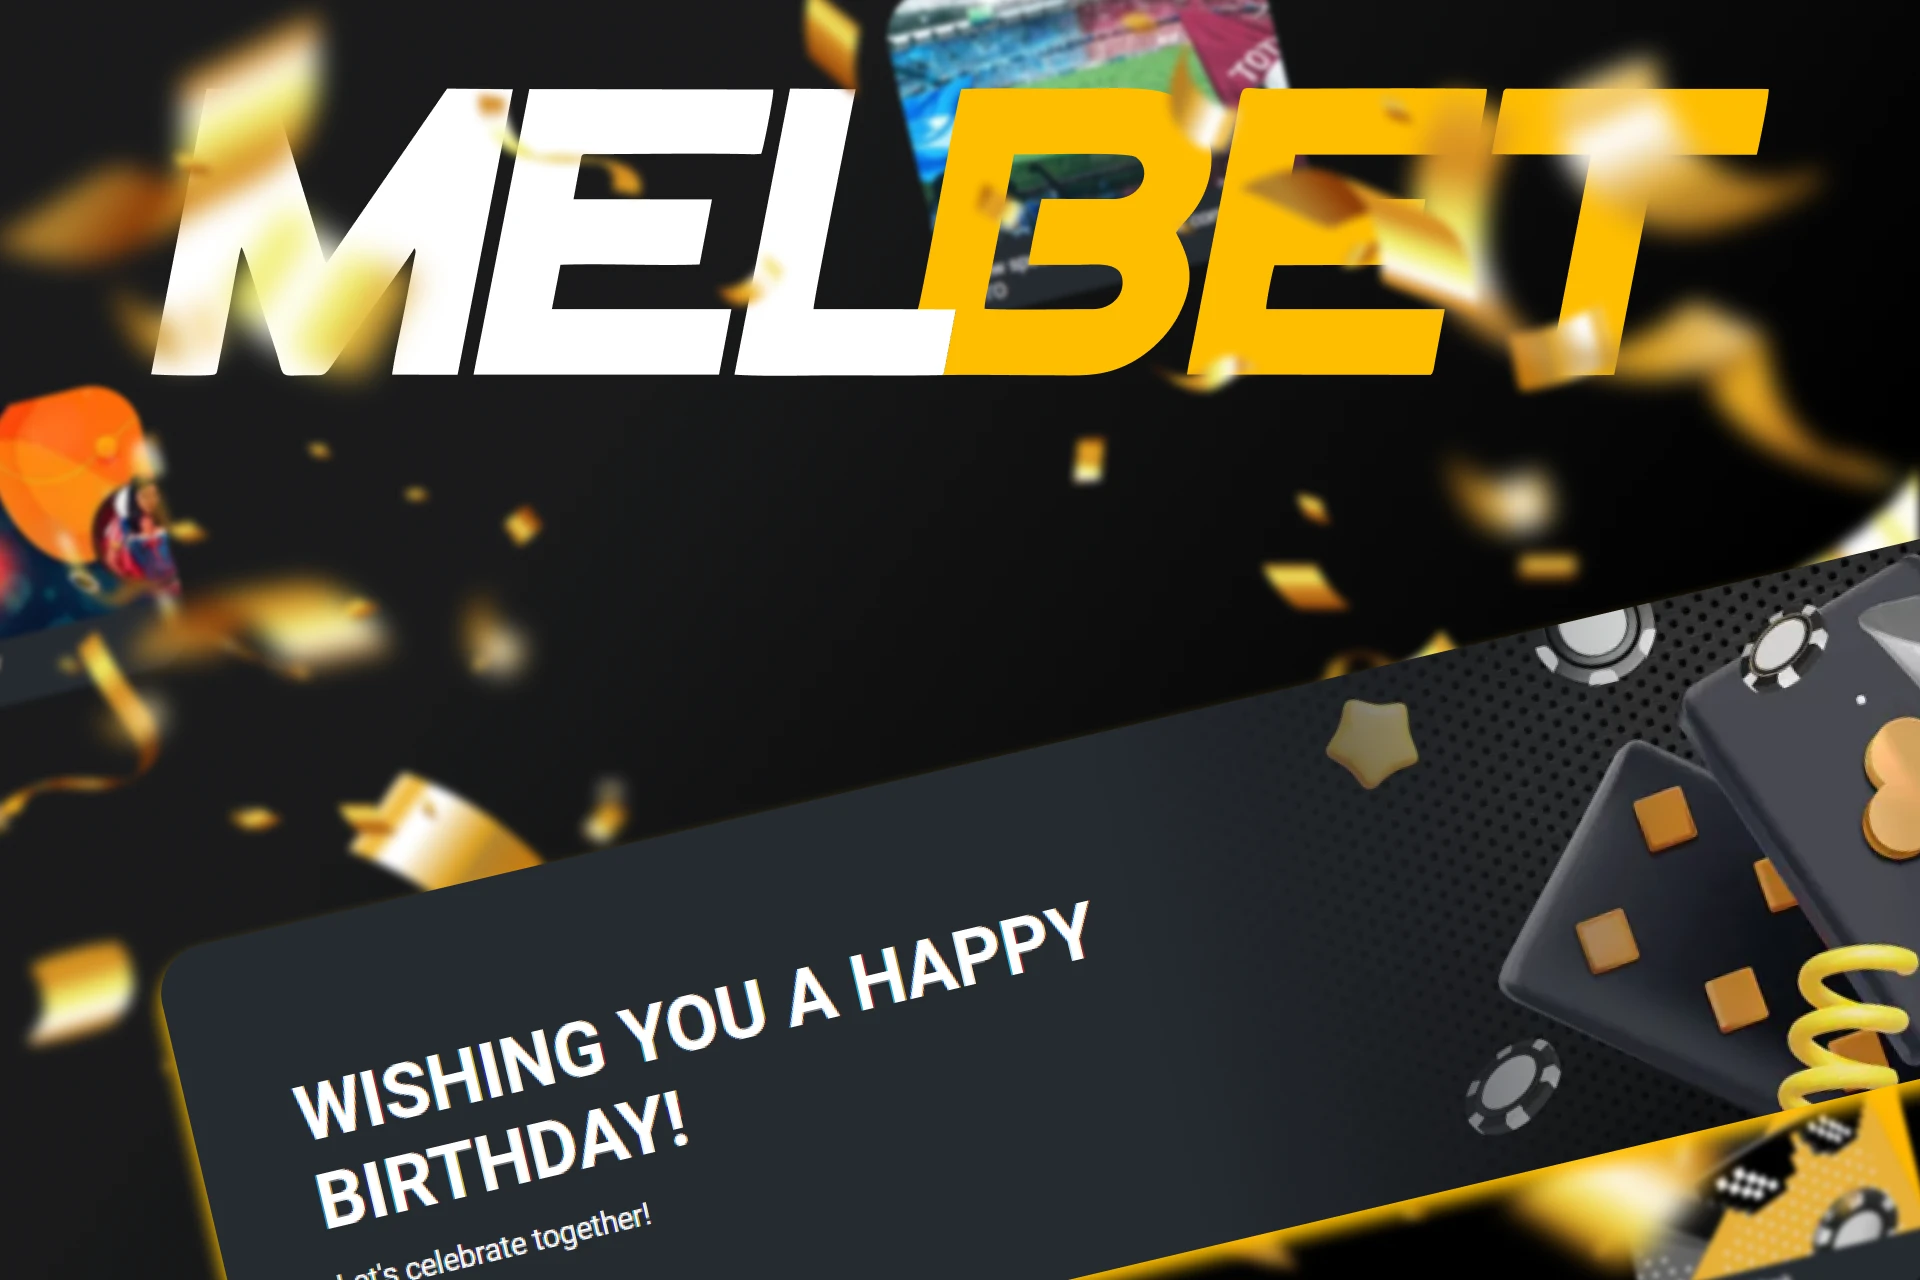 Celebrate your birthday with Melbet and get a bonus.